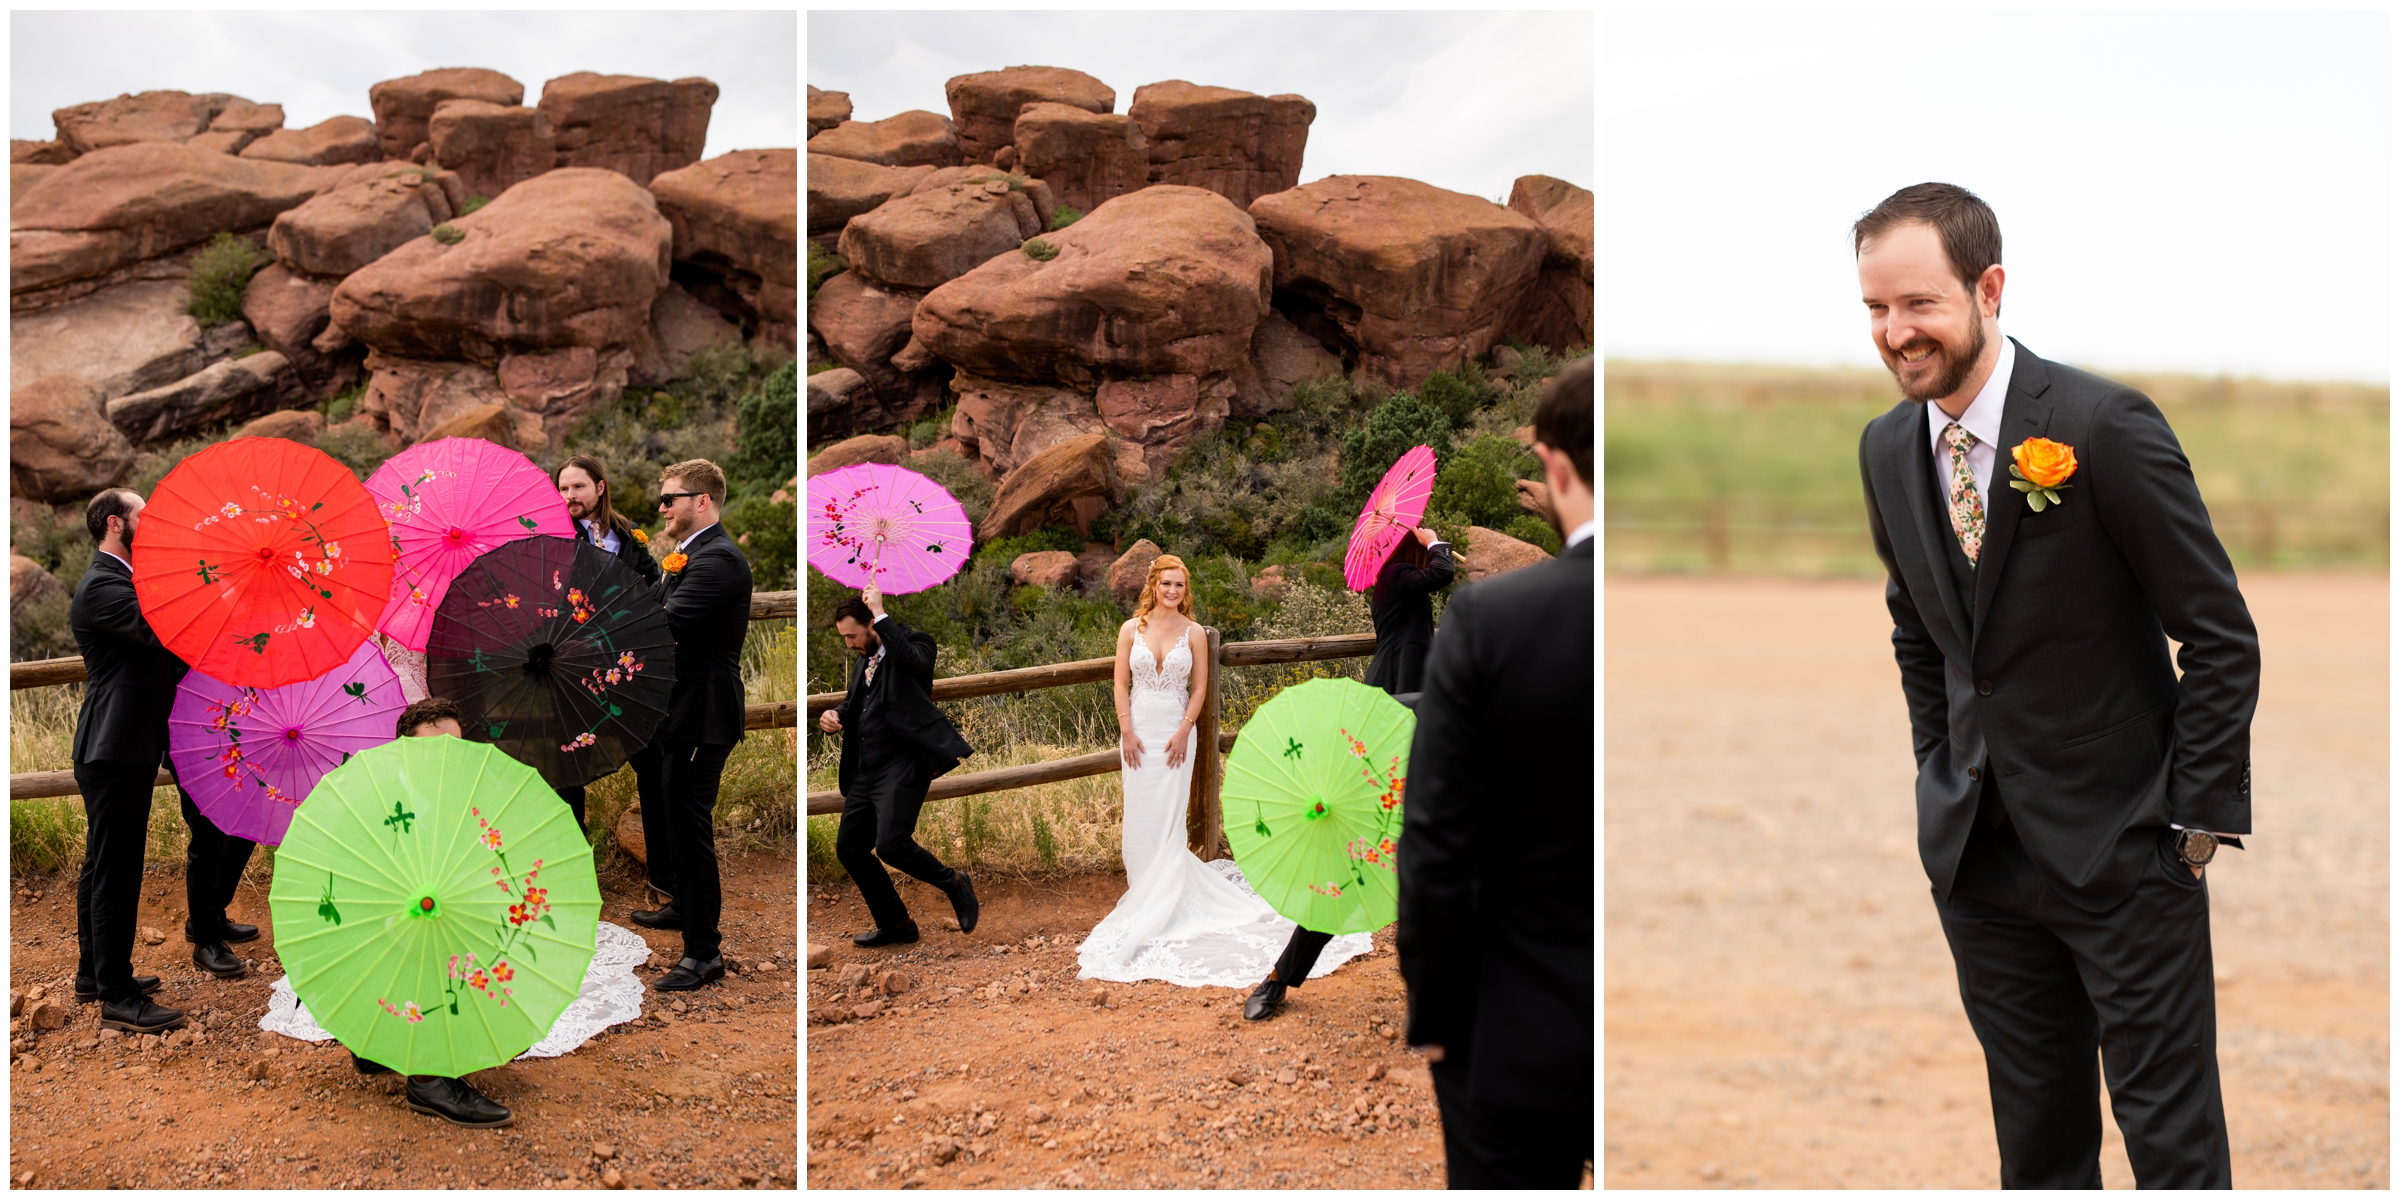 unique first look between bride and groom at the Retreat at Solterra and Red Rocks Colorado summer wedding